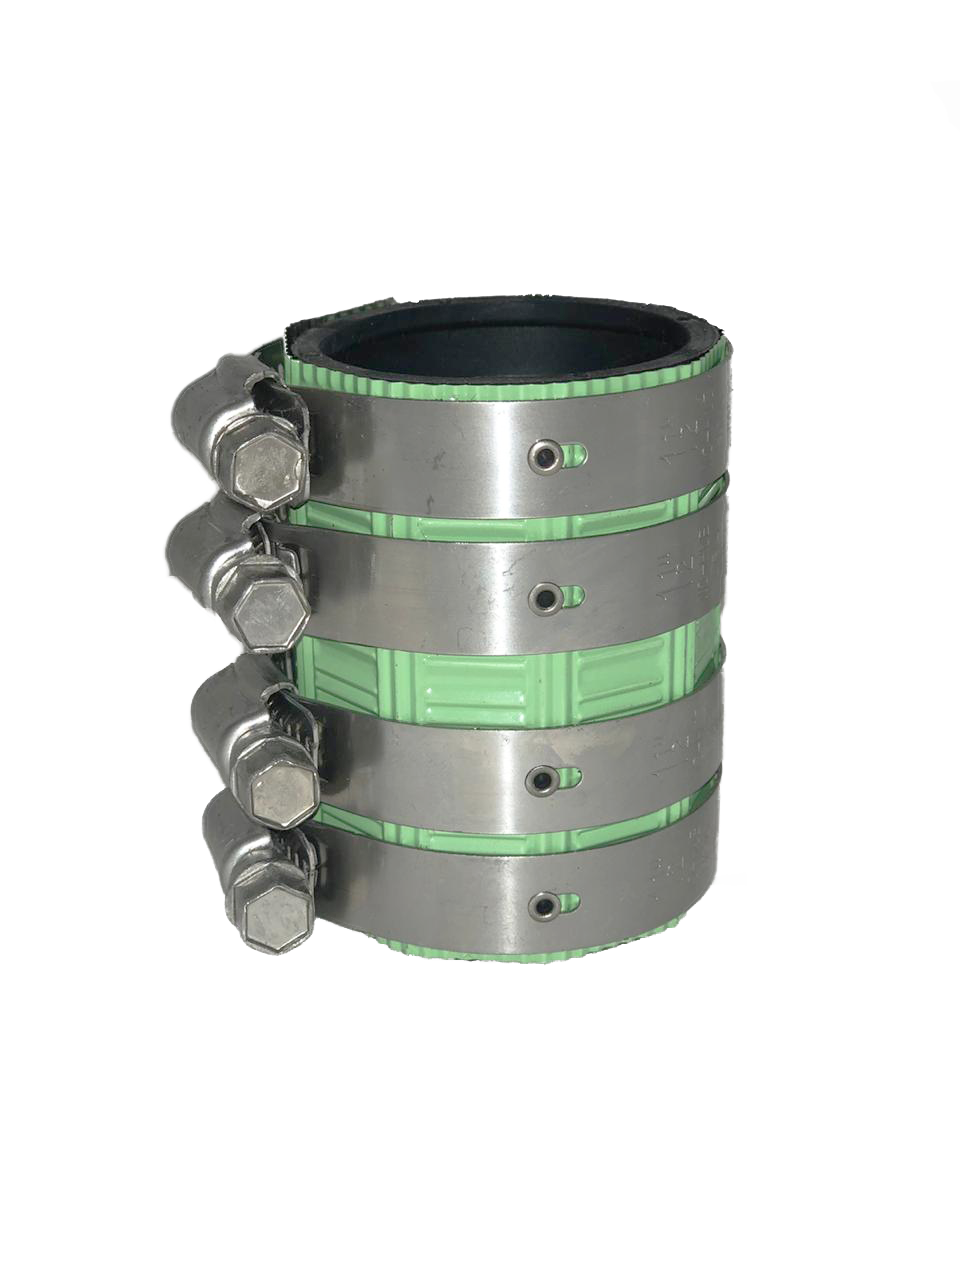 6217H8G 1 1/2&quot; - 4 BAND IDEAL
(GREEN) COUPLING {60} - 3/8&quot;
Hex-80 inch/lbs Installation